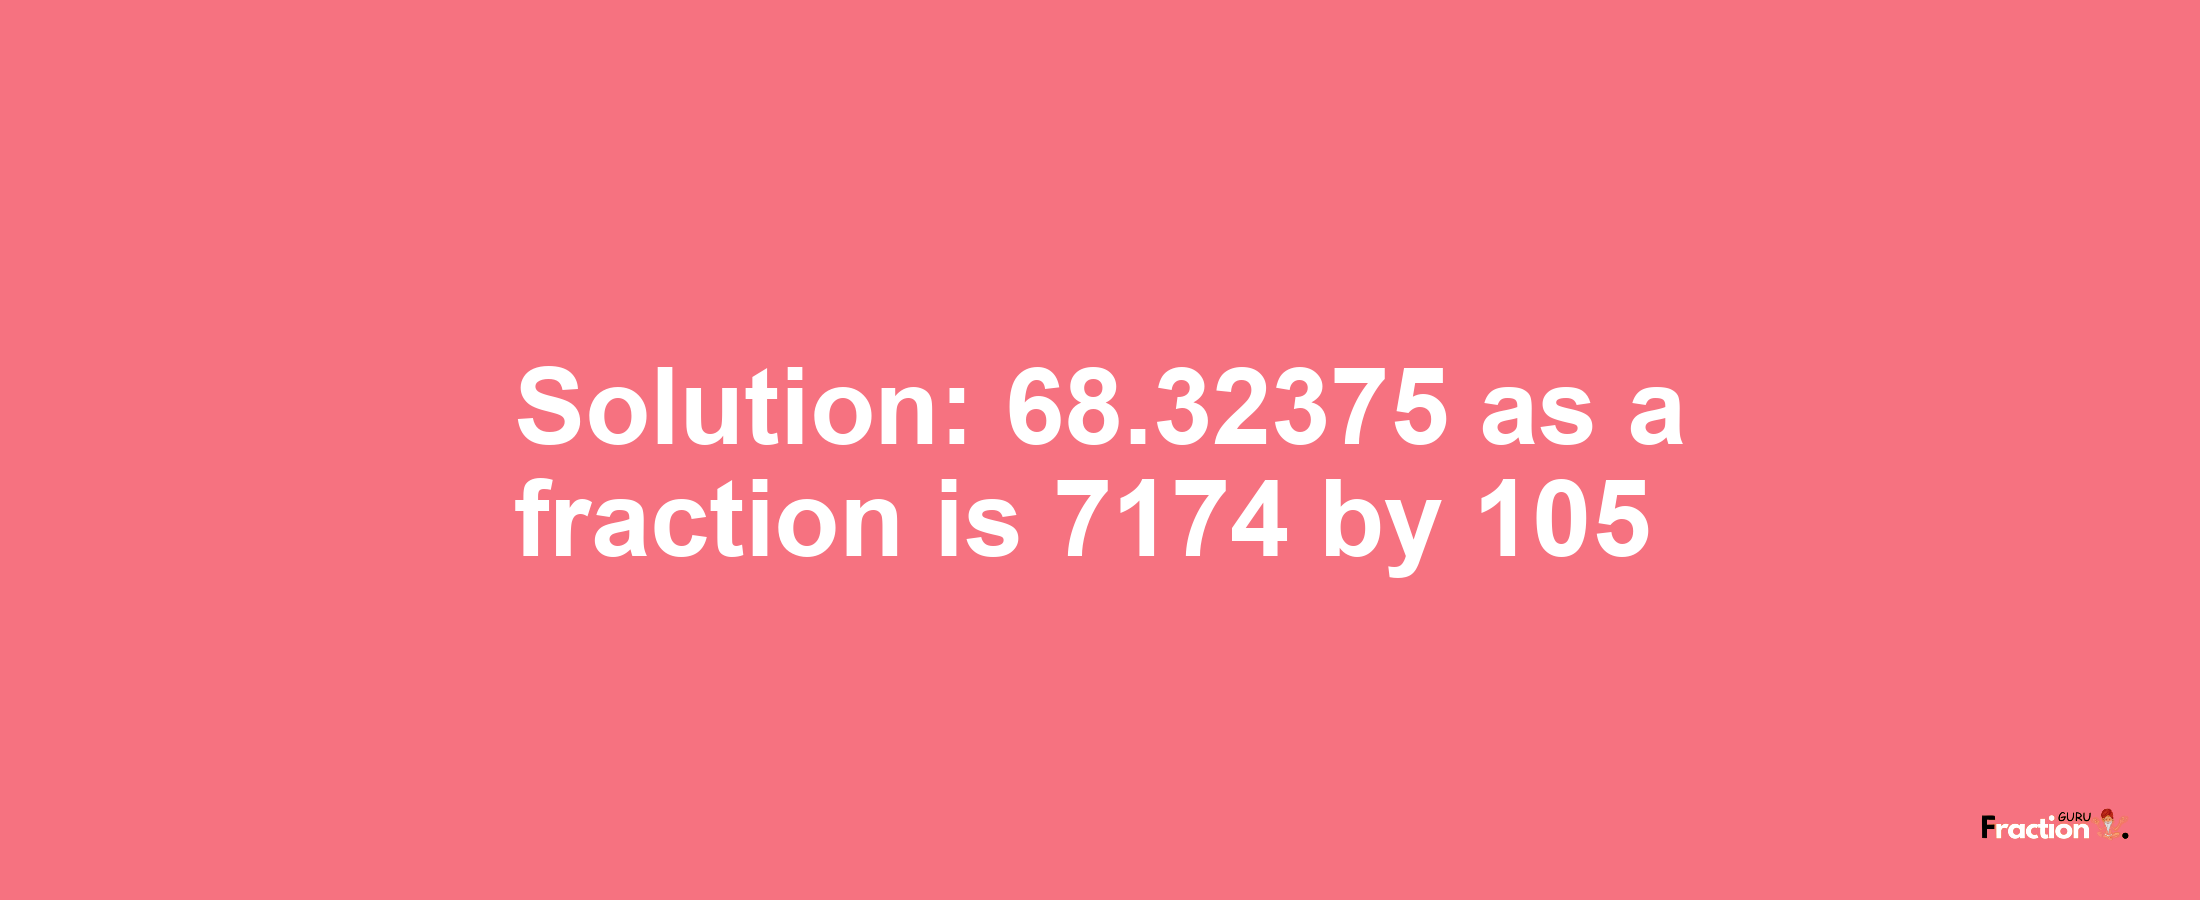 Solution:68.32375 as a fraction is 7174/105